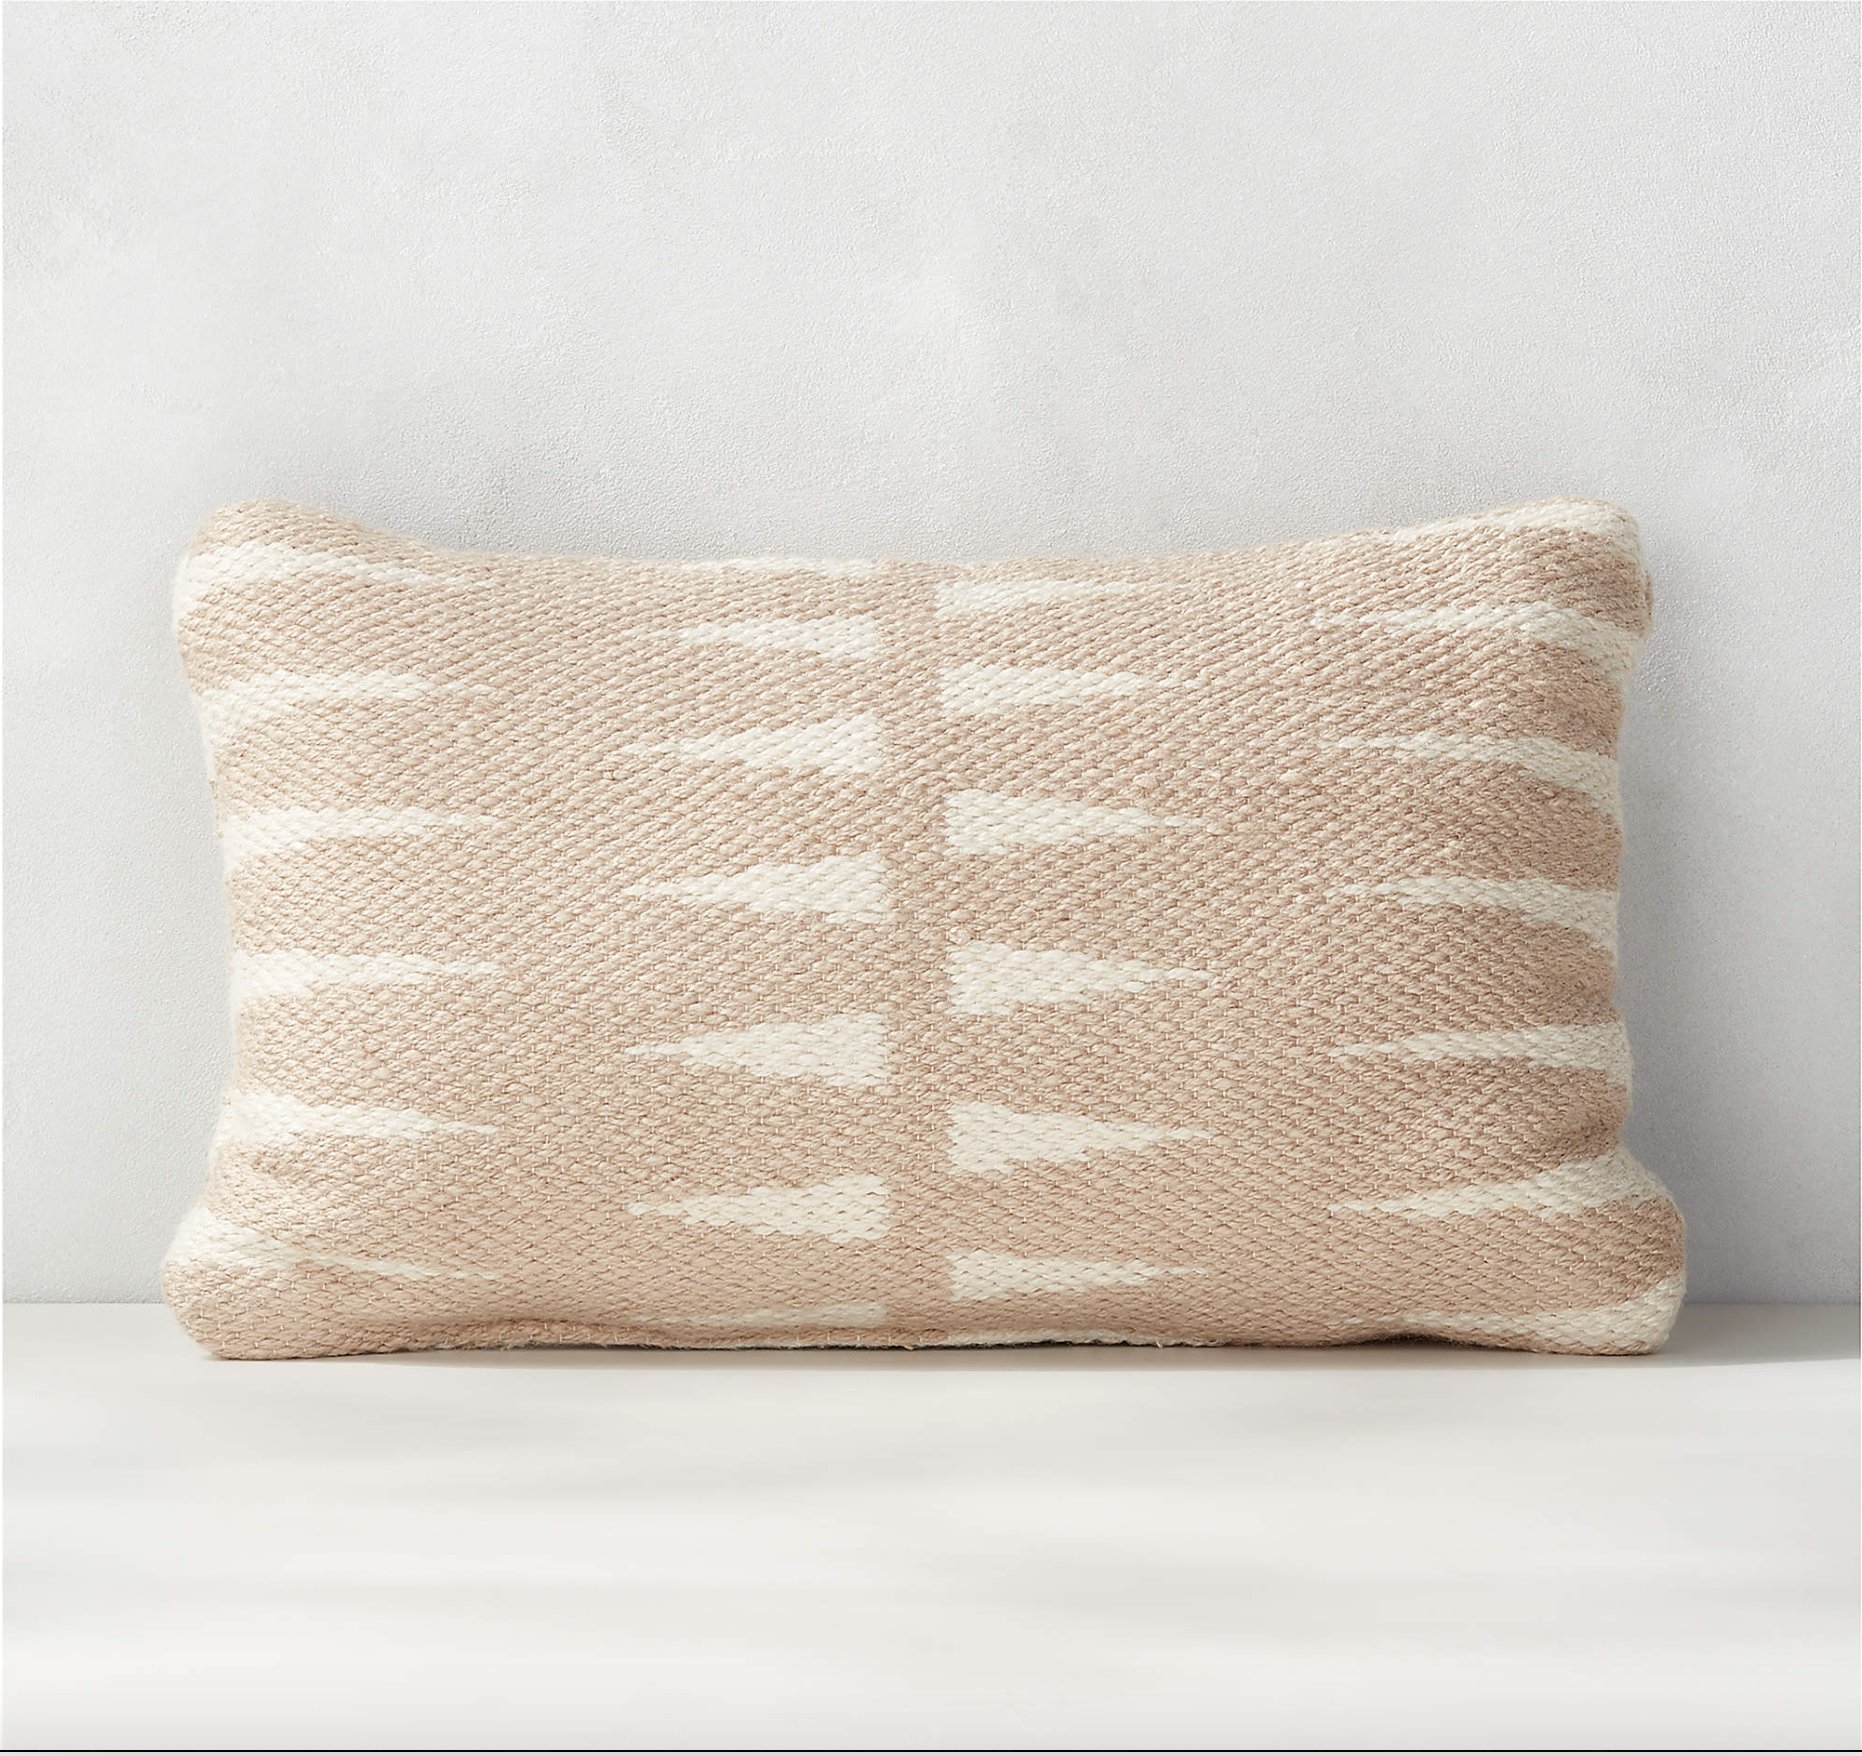 20"X12" SHIA NATURAL AND WHITE OUTDOOR PILLOW - Image 0